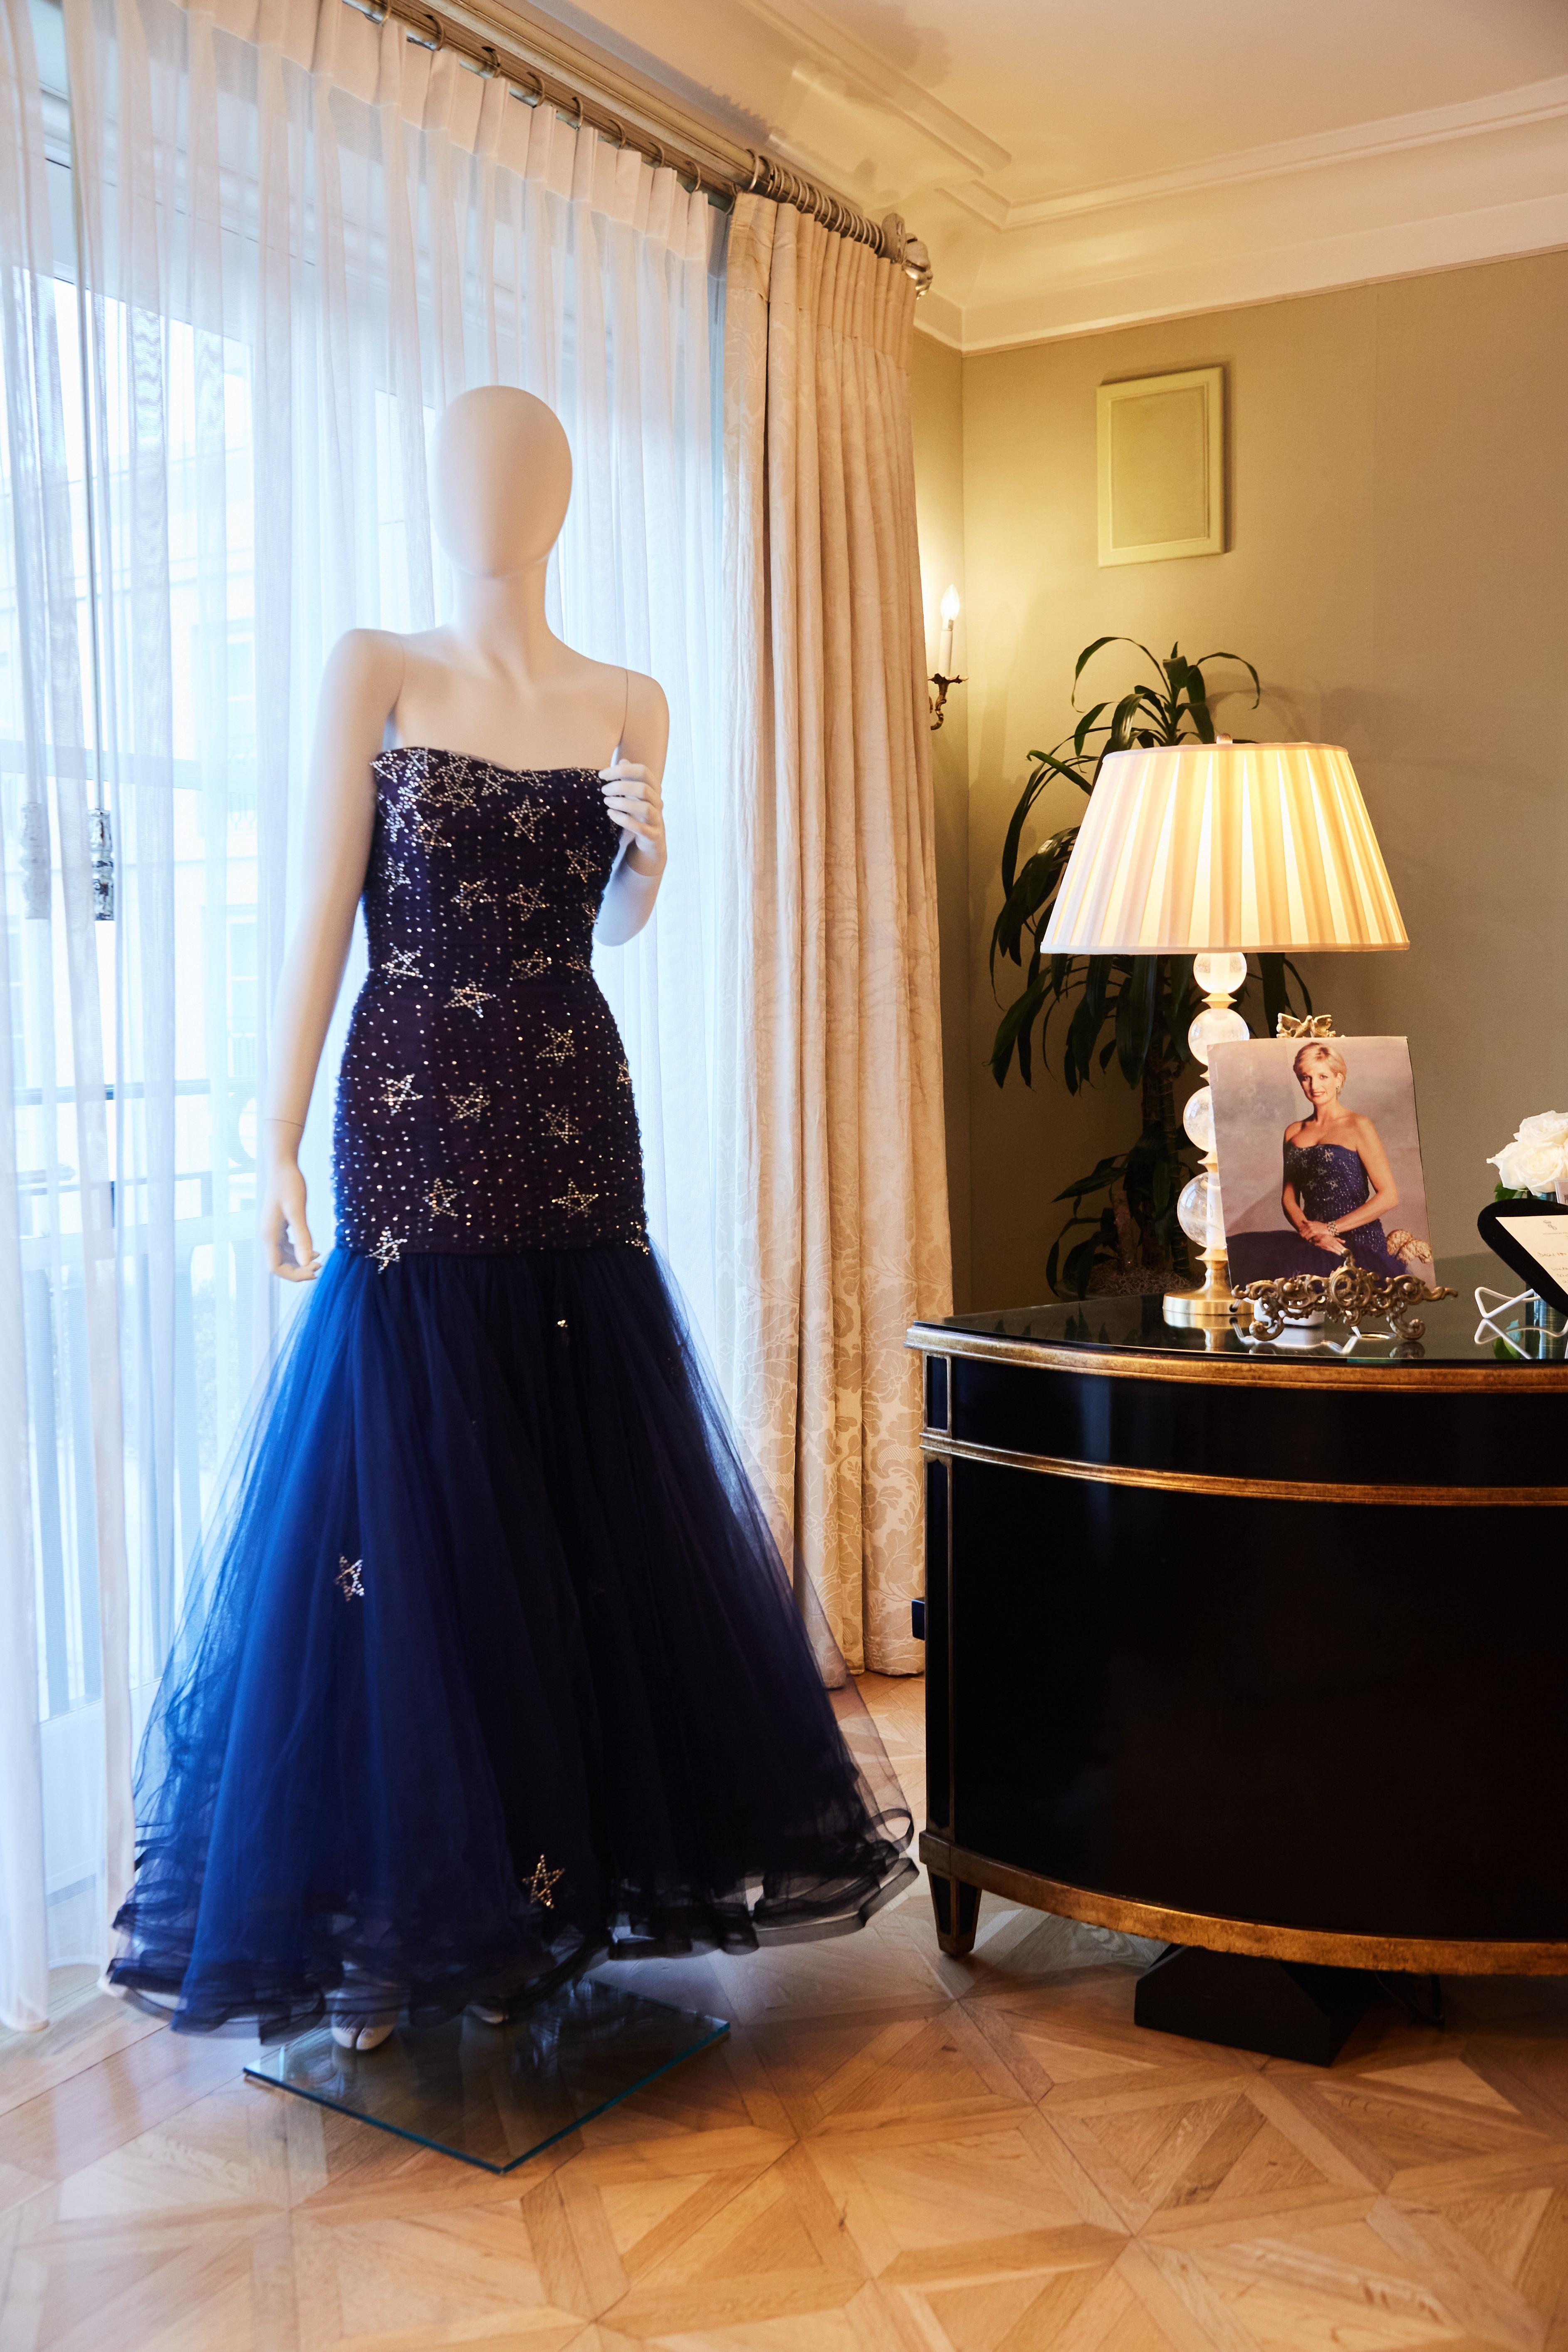 a mannequin is wearing a blue dress next to a lamp